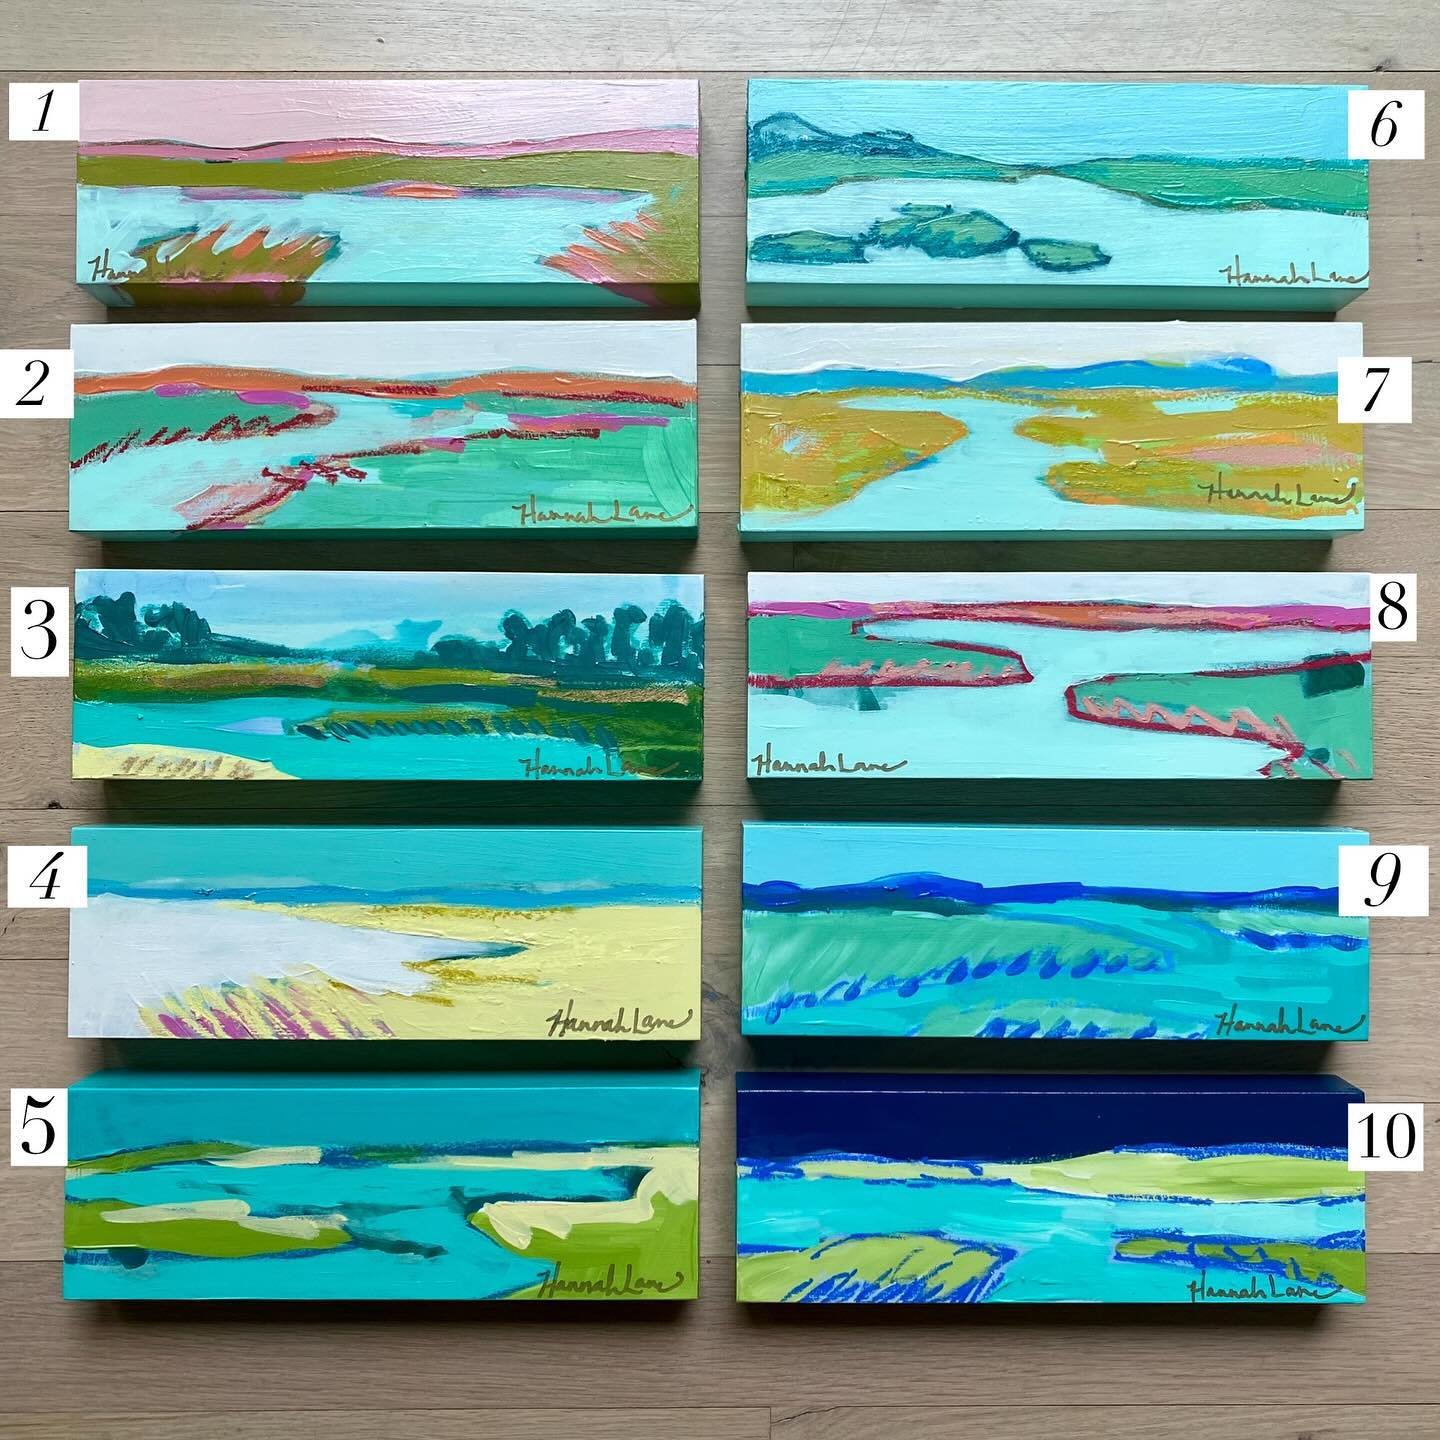 &ldquo;Mother&rsquo;s Day Marsh&rdquo; 💕
⠀⠀⠀⠀⠀⠀⠀⠀⠀
12x4x1.5 mixed media on gallery wrapped wood panel. $100 each. Please comment # (s) + &ldquo;SOLD&rdquo; in the comment feed &amp; DM me your email address. You will receive a pay pal invoice &amp; 